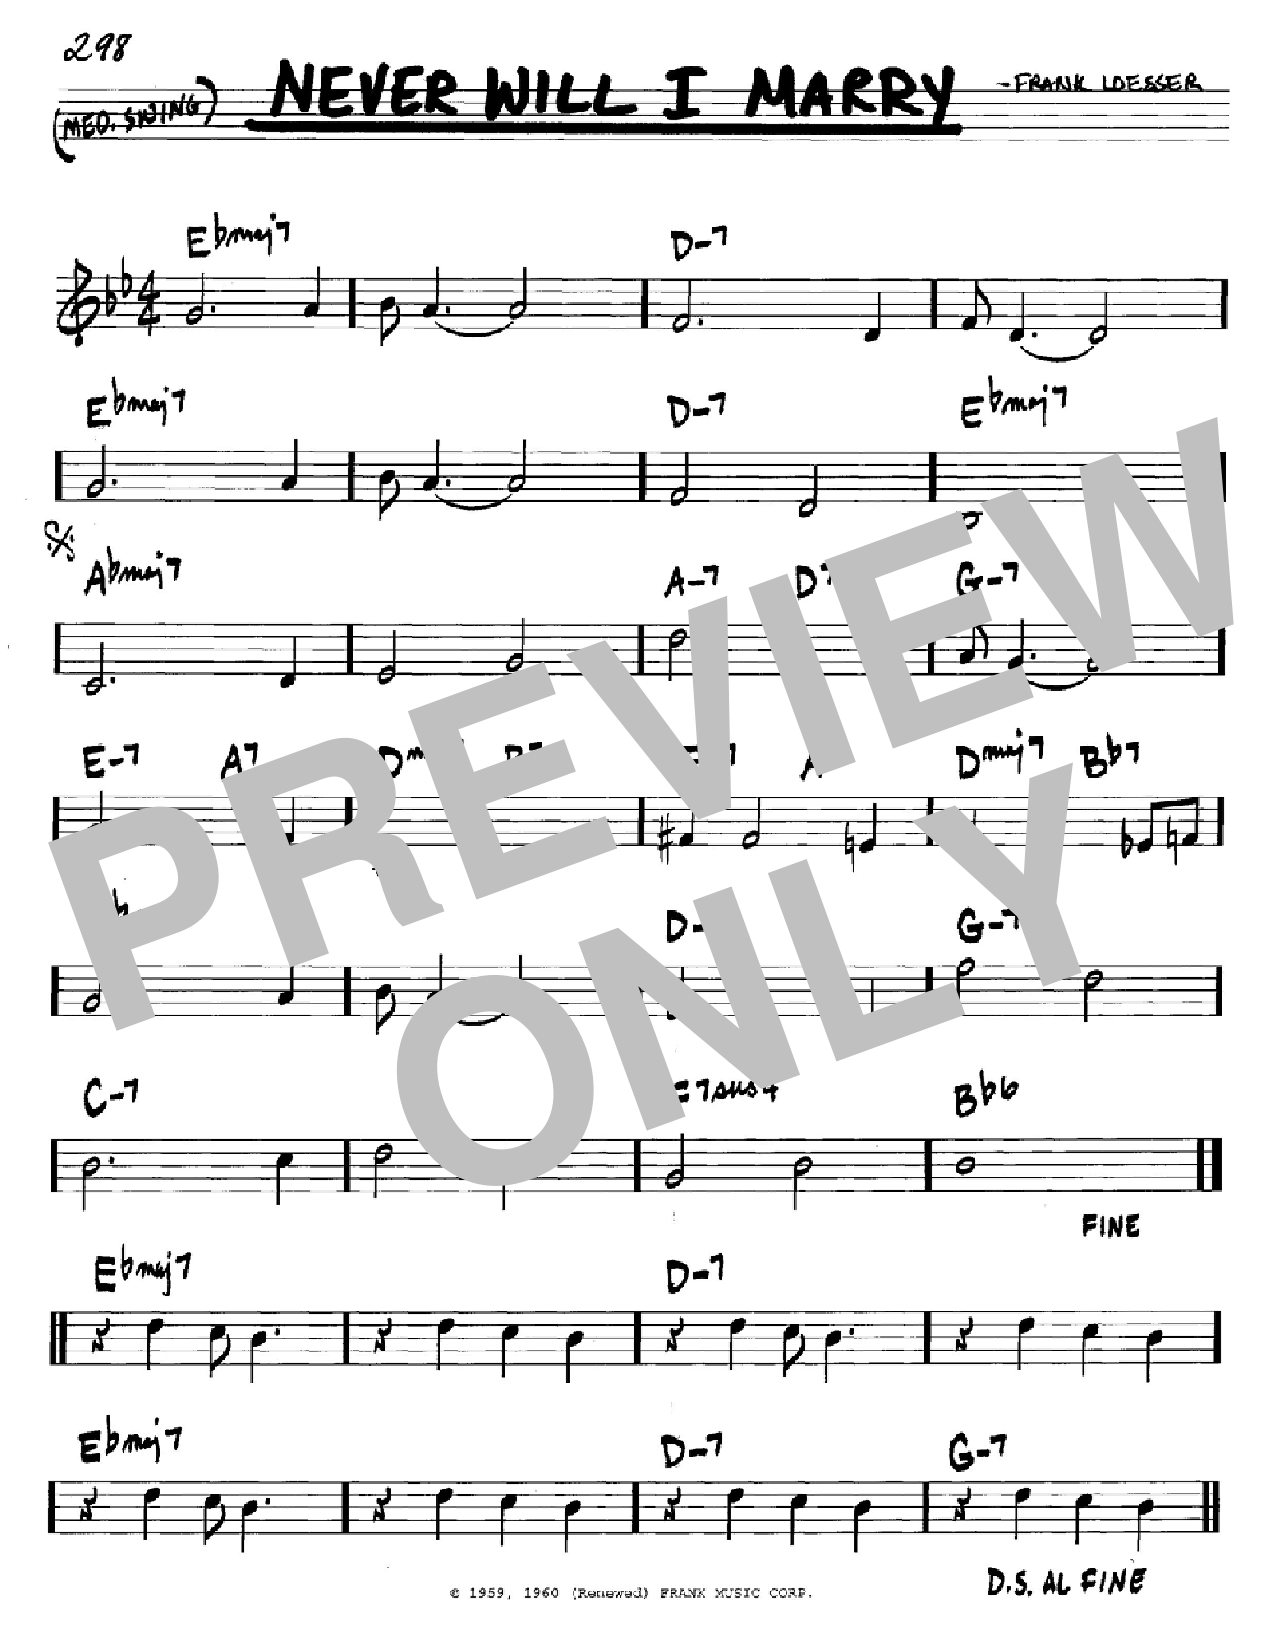 Download Frank Loesser Never Will I Marry Sheet Music